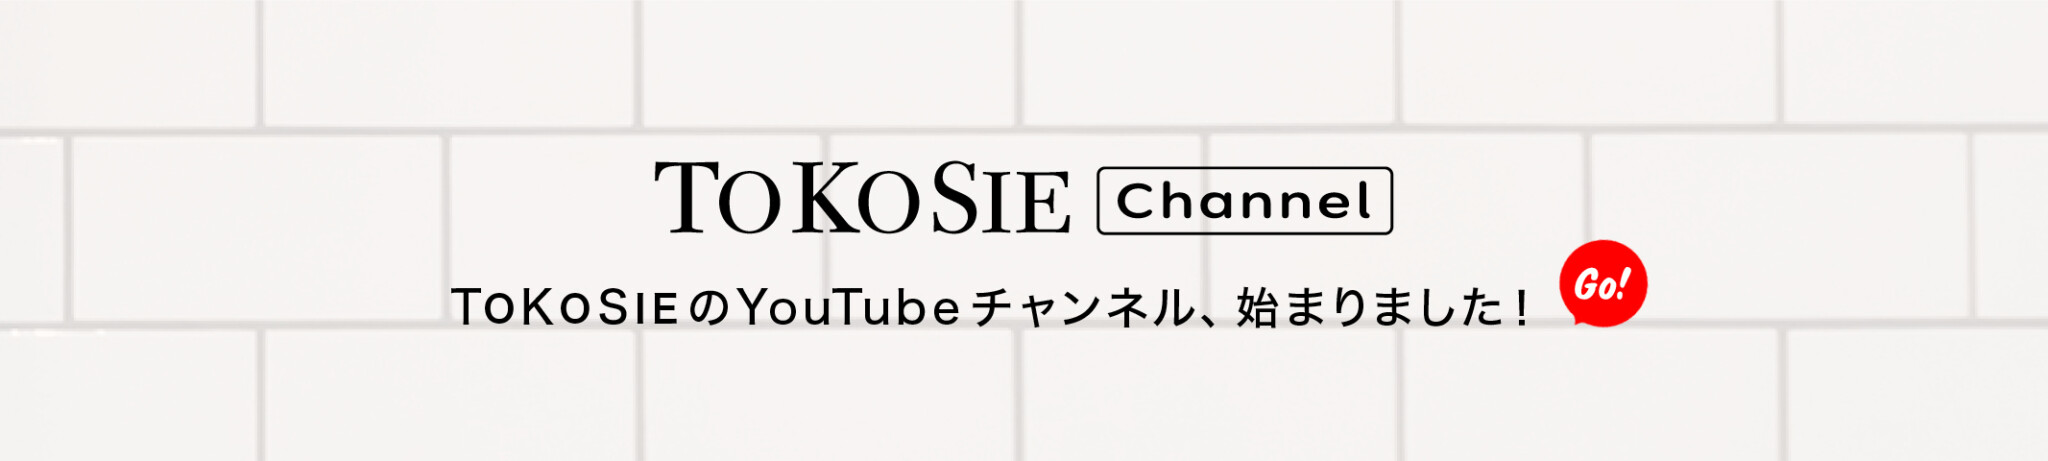 YouTube-channel-1600x360